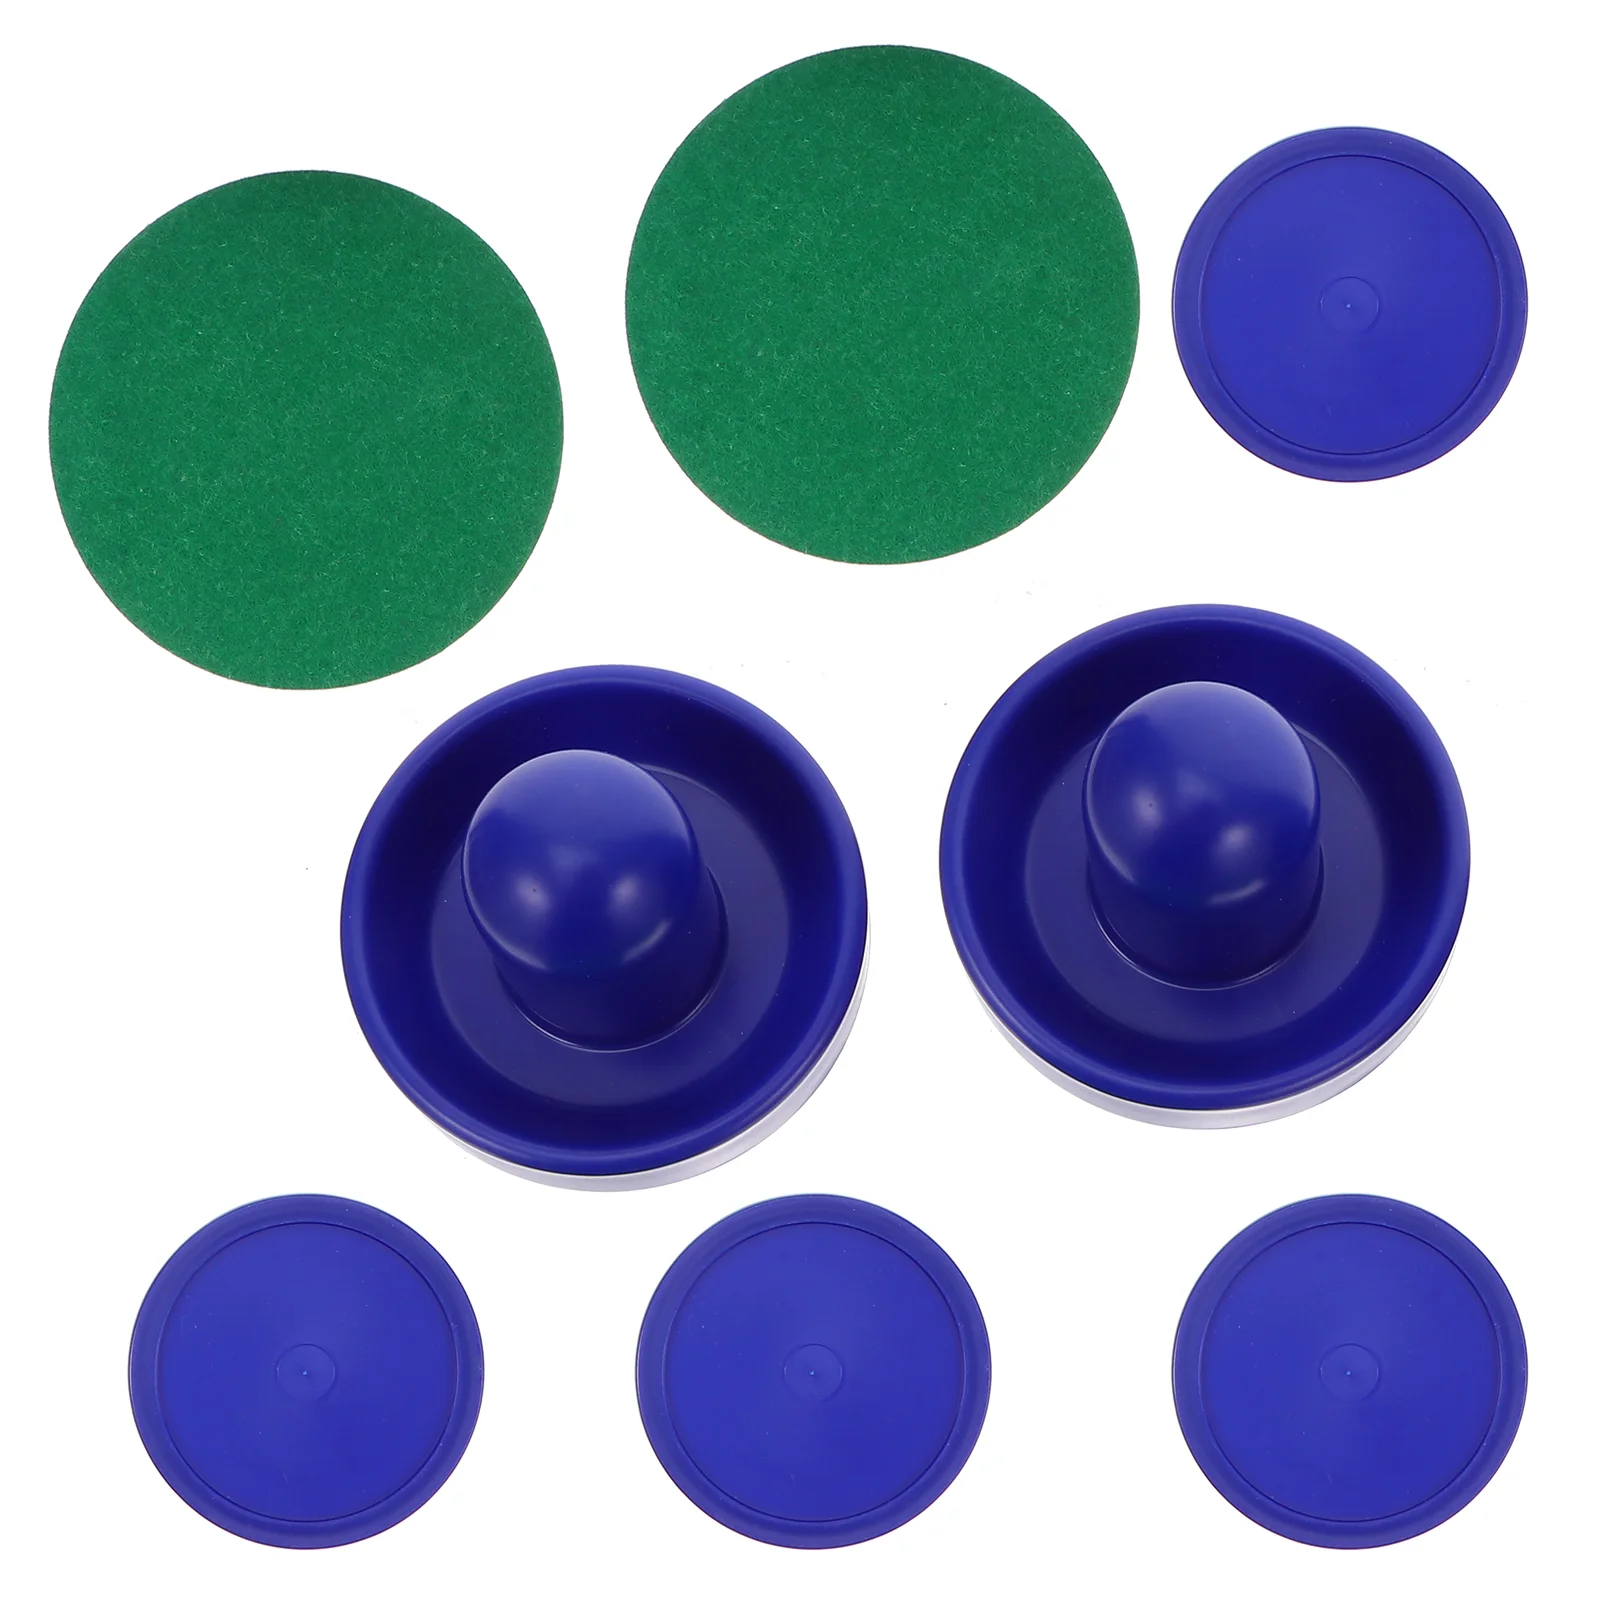 1set Air Hockey Pushers Pucks Paddles Replacement Accessories Air Hockey Game Table Attachment Supplies For Game Tables 76mm